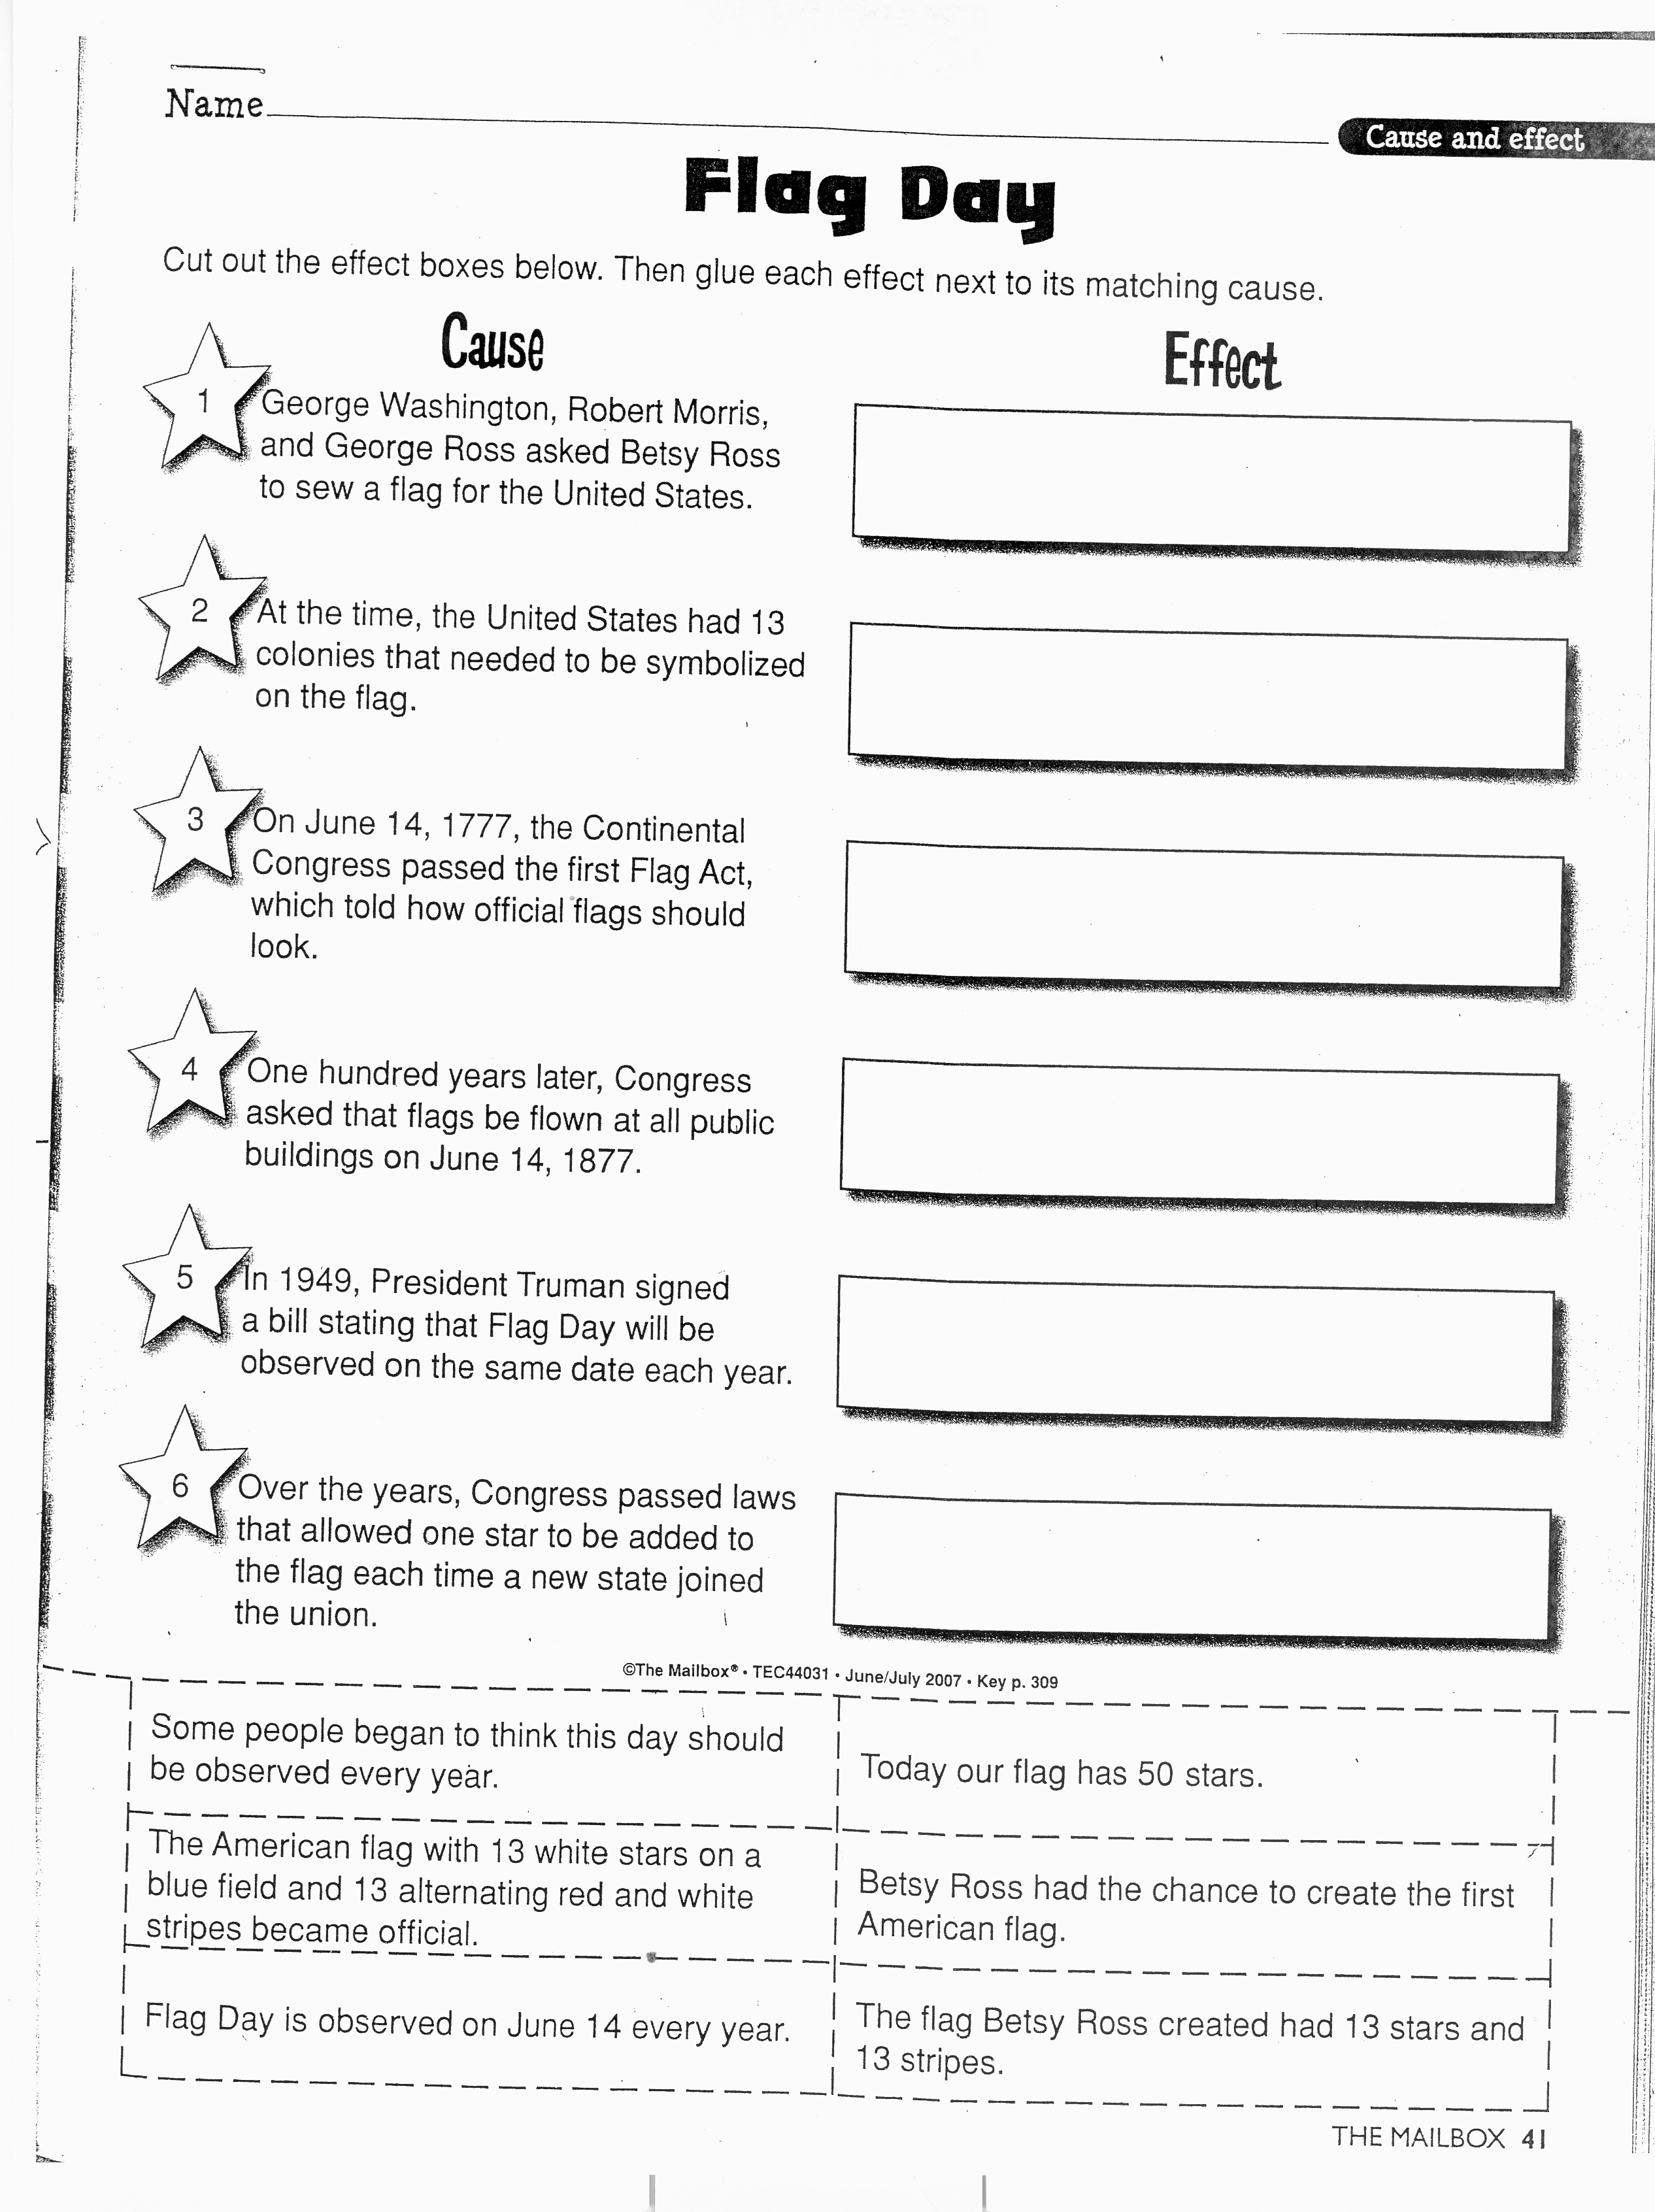 cause-and-effect-worksheets-15-worksheets